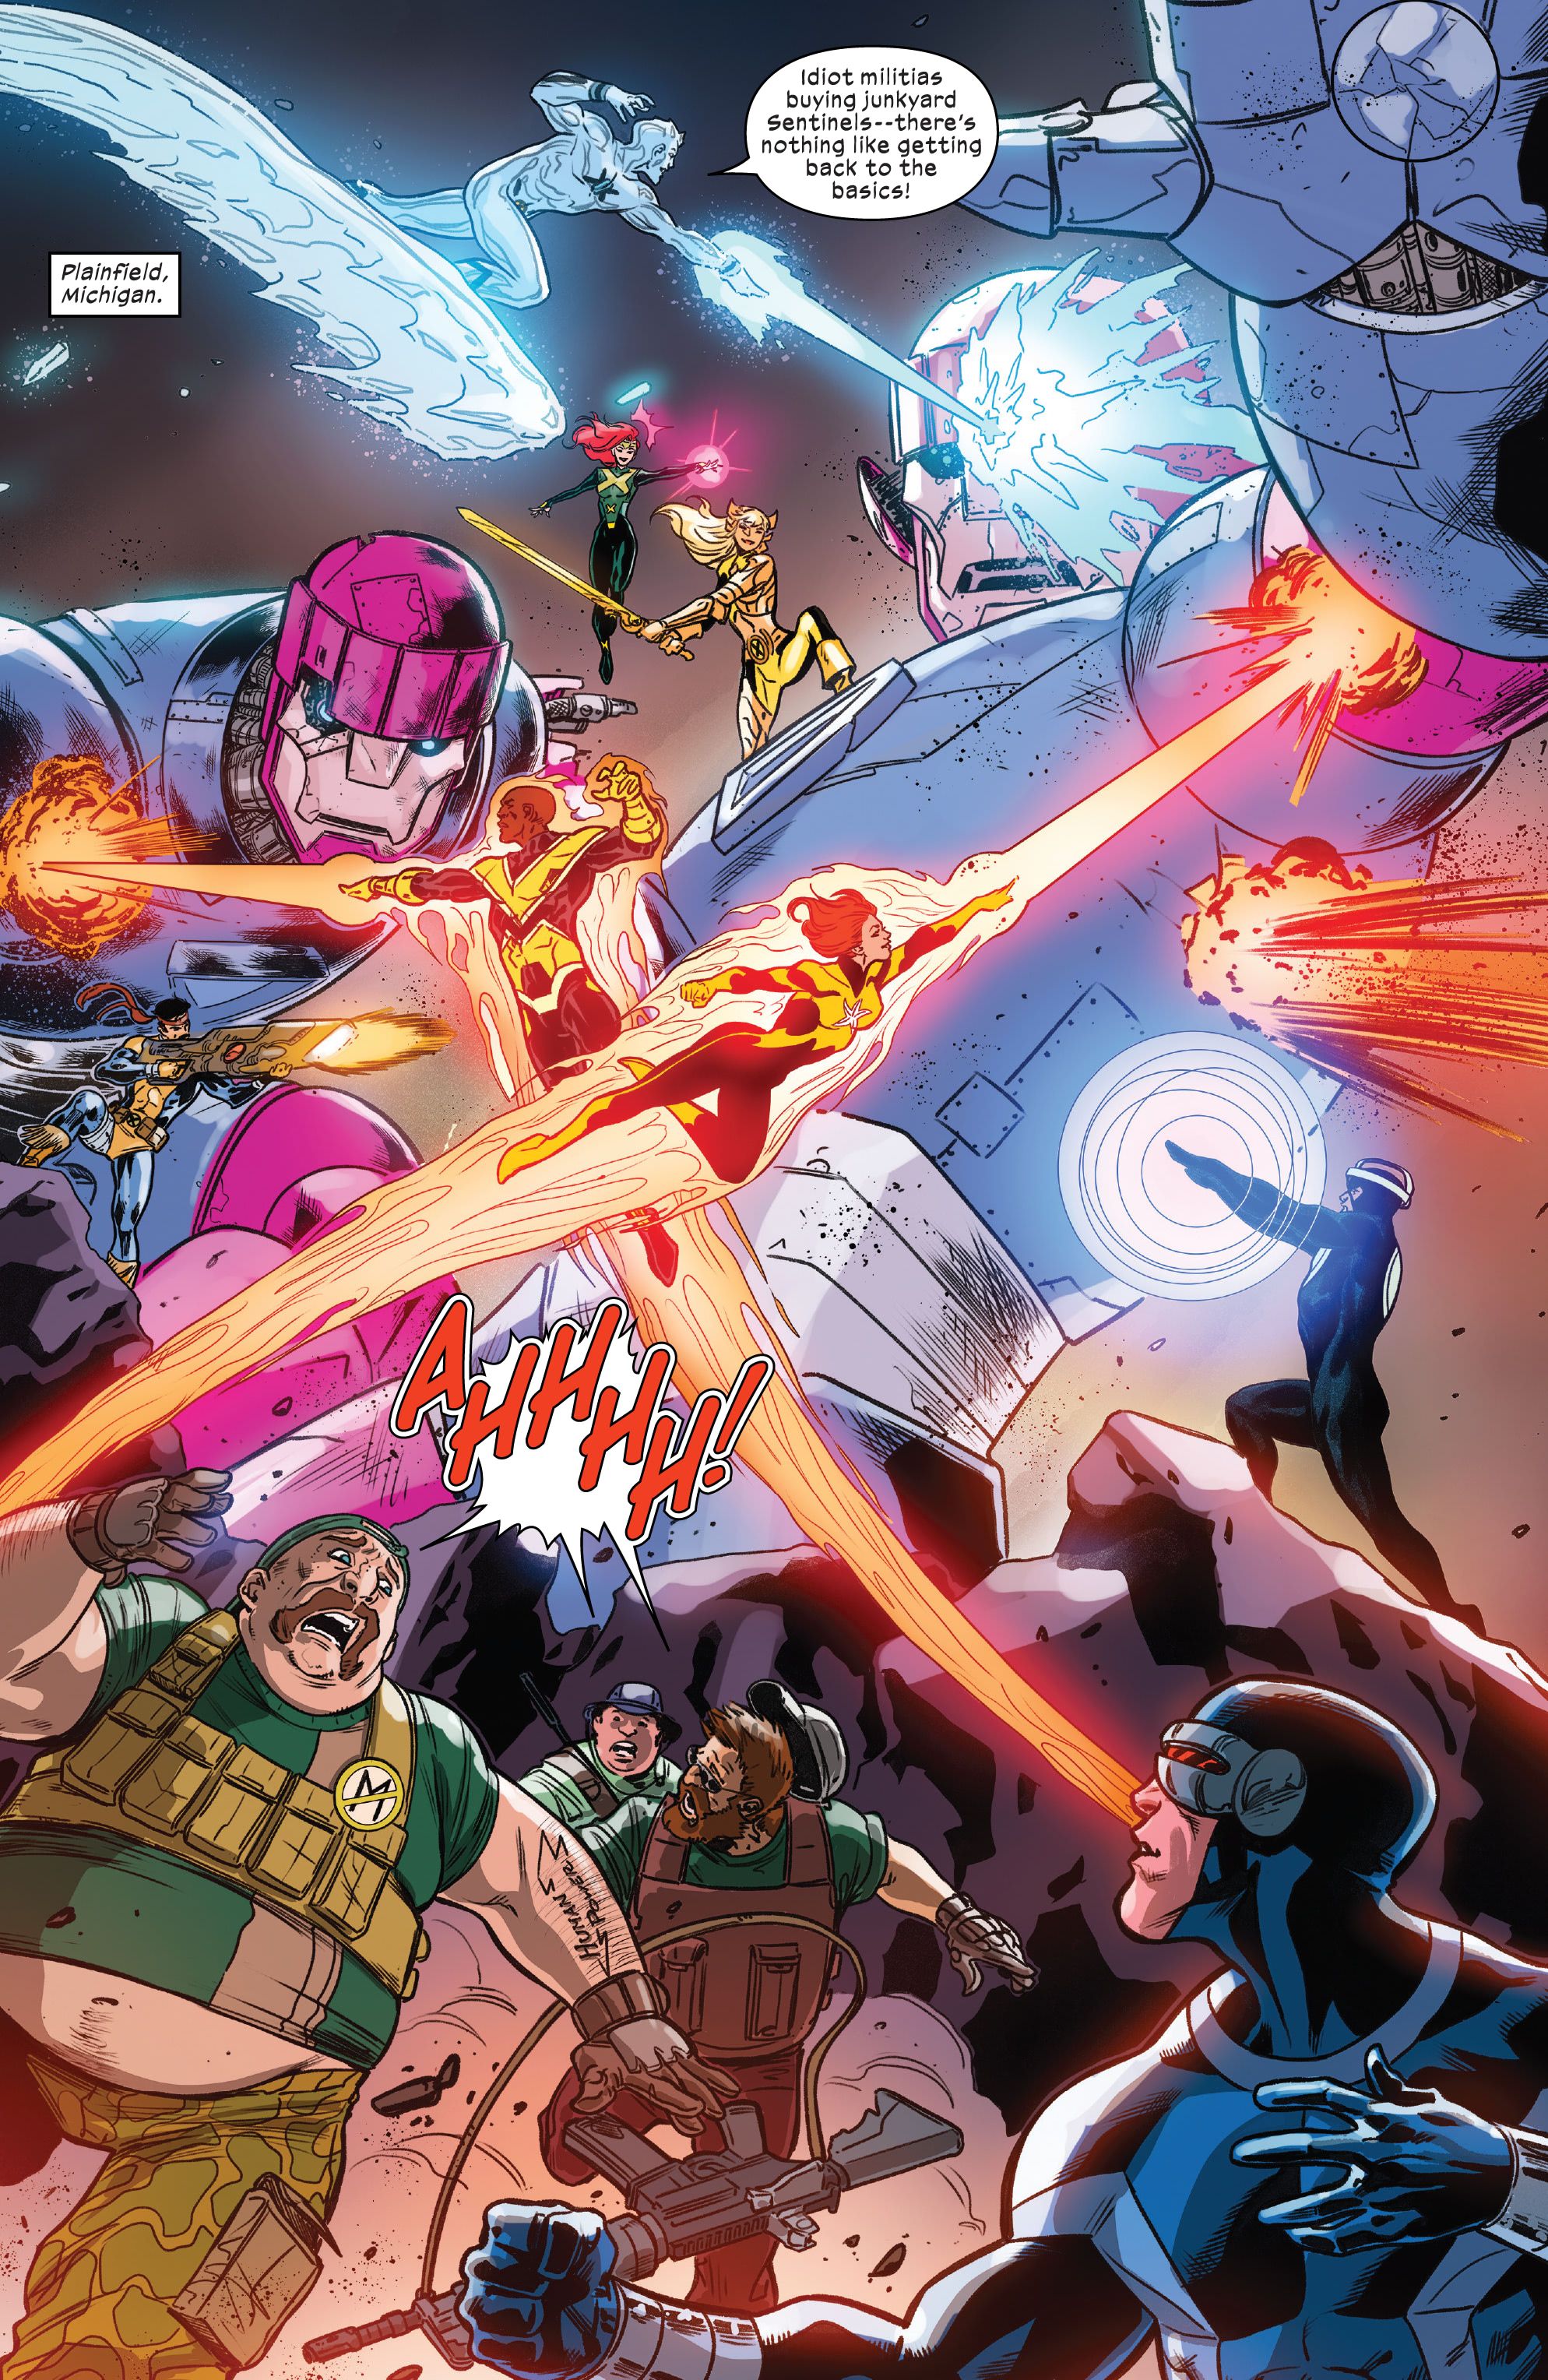 The X-Men fight Sentinels bought by racists